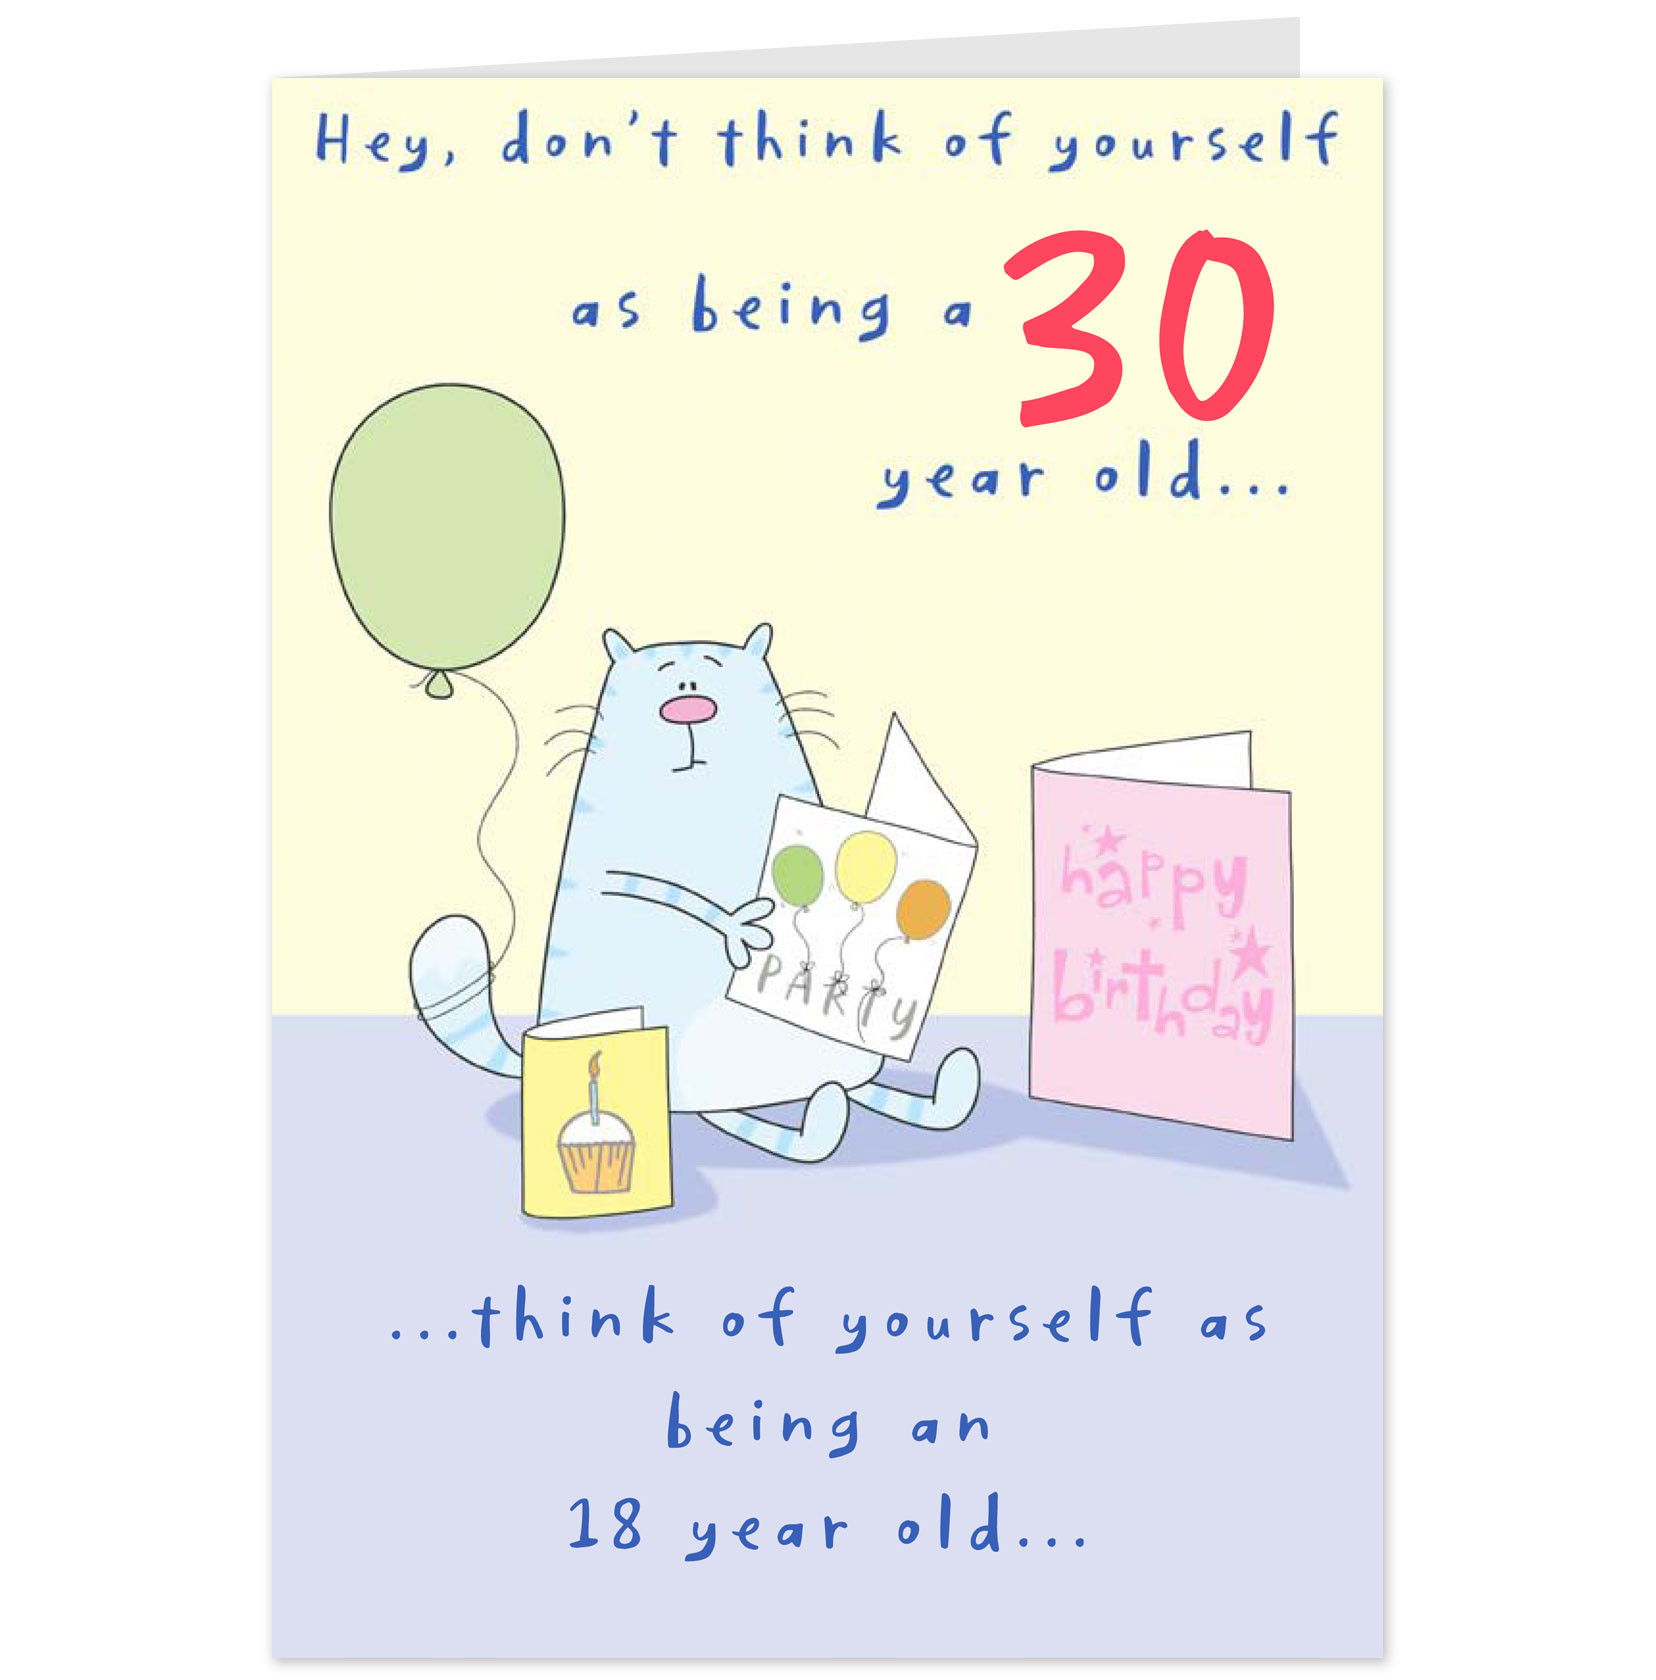 Funny Birthday Card Quotes
 1st Birthday Quotes For Cards QuotesGram